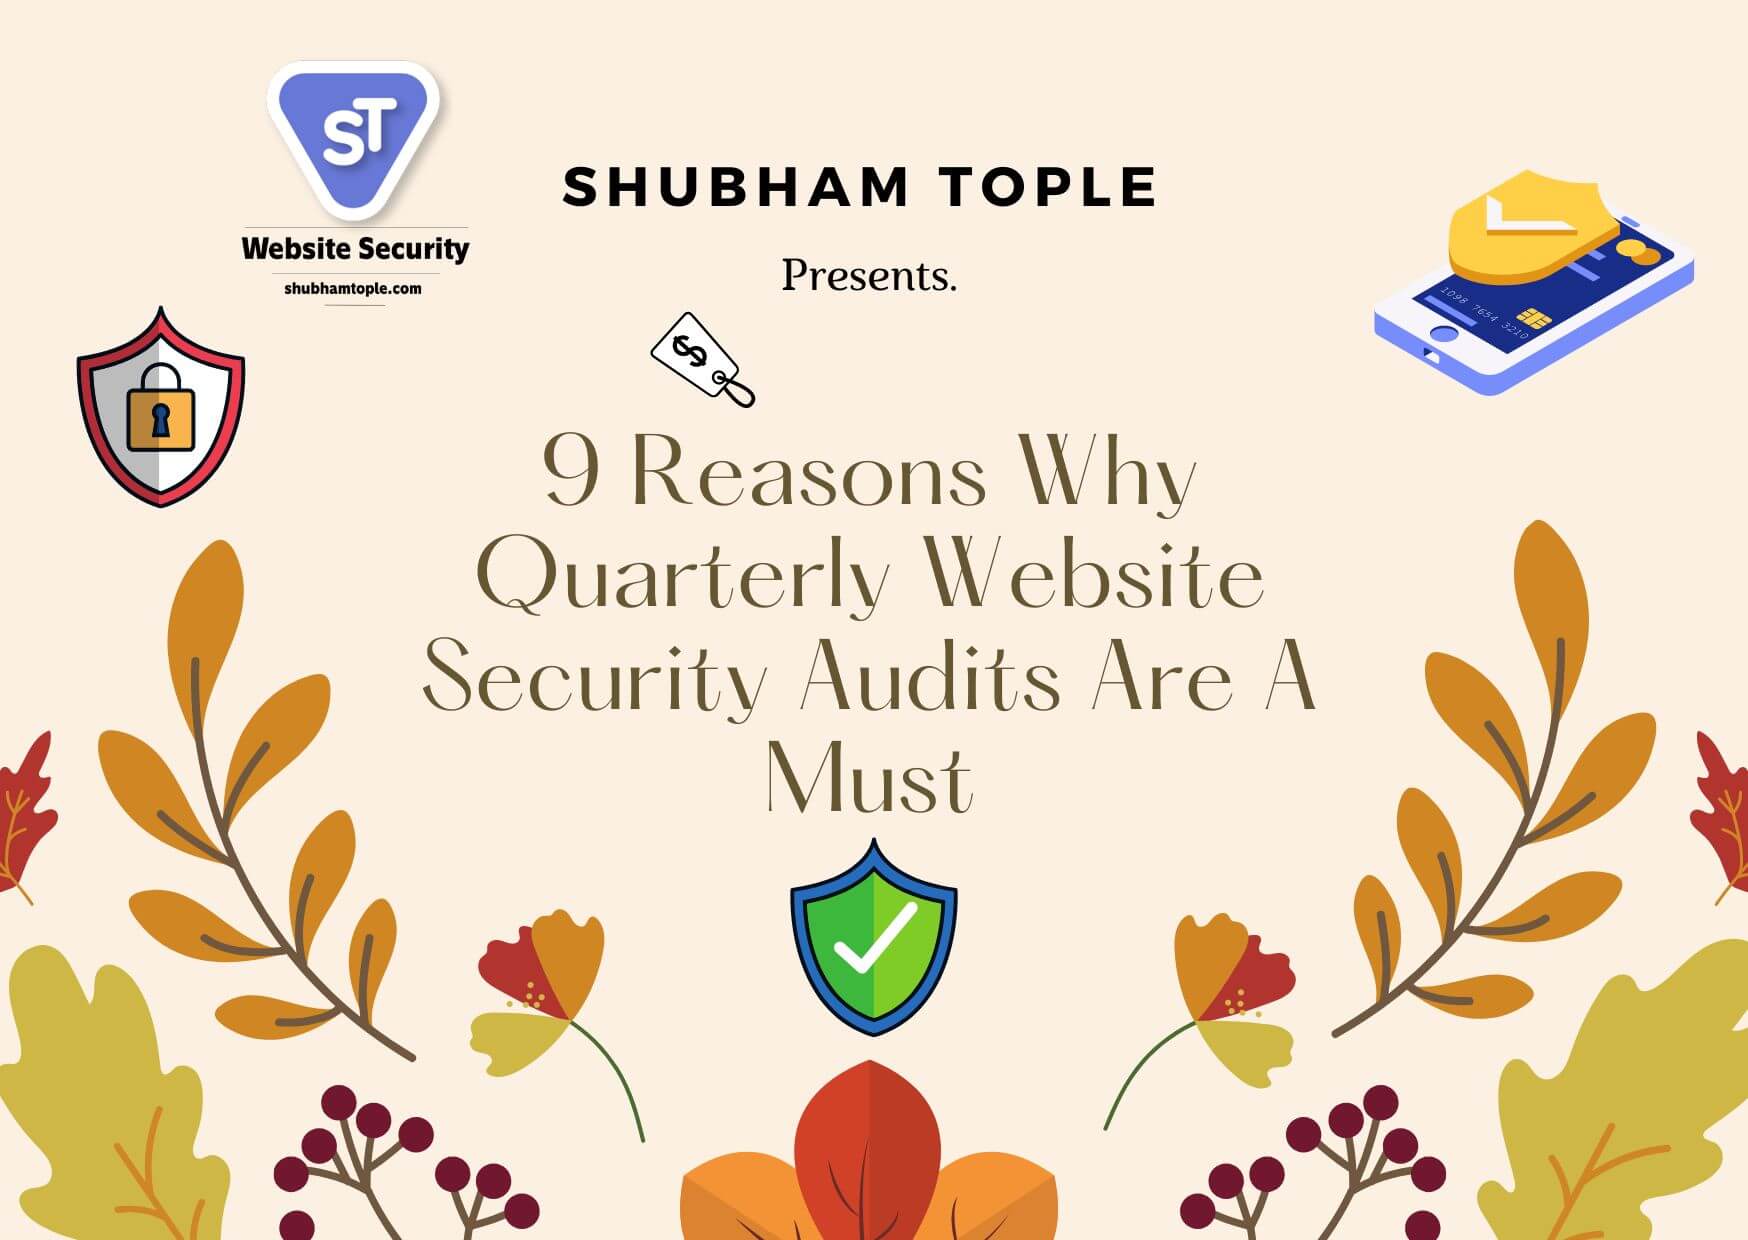 9 Reasons Why Quarterly Website Security Audits Are A Must